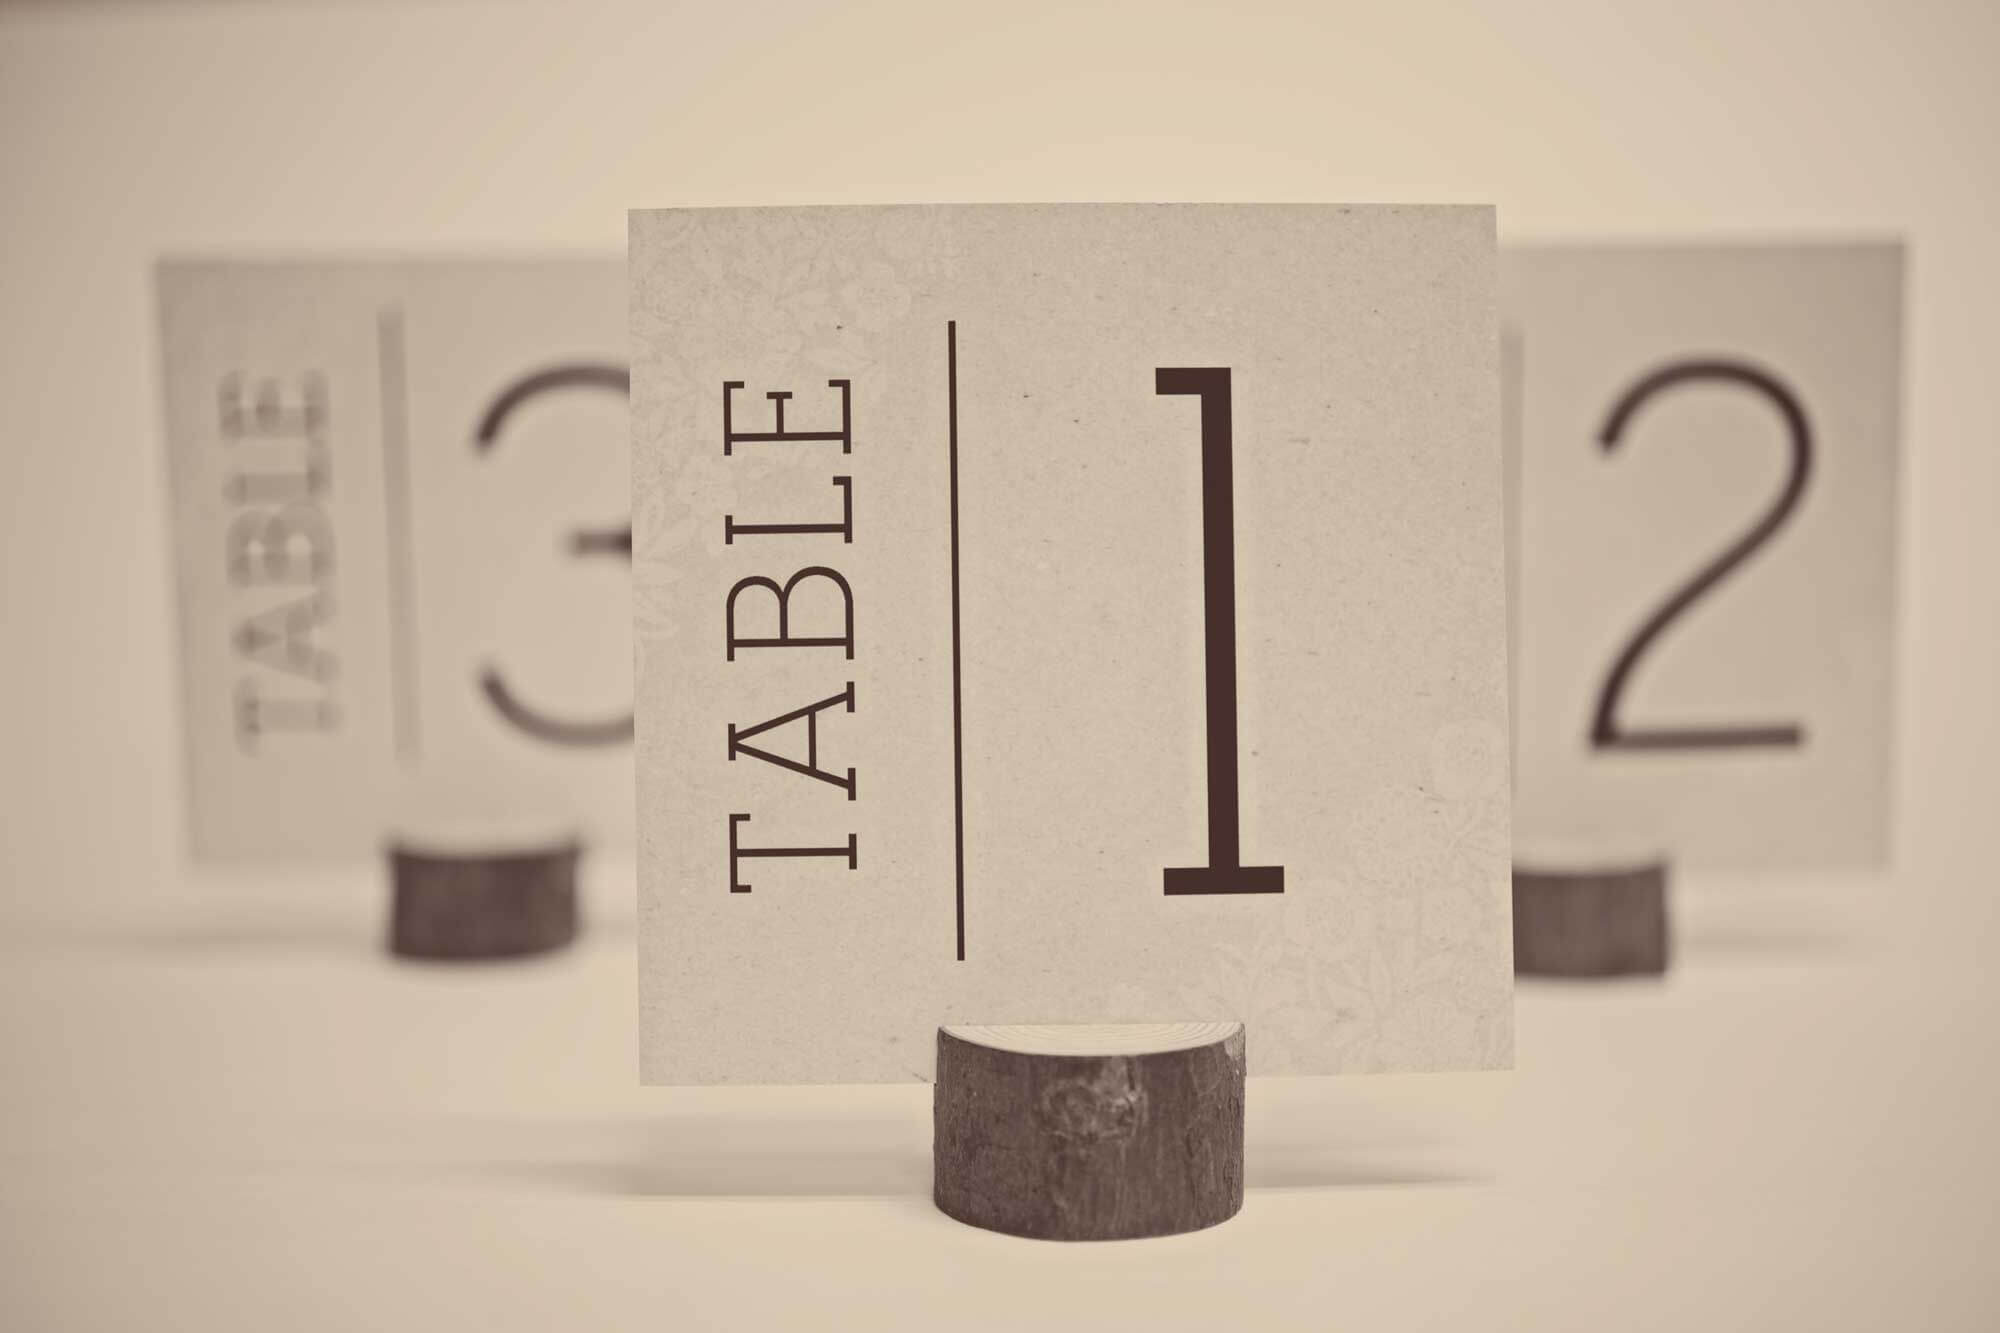 Free Wedding Table Number Cards Inside Table Number Cards Template